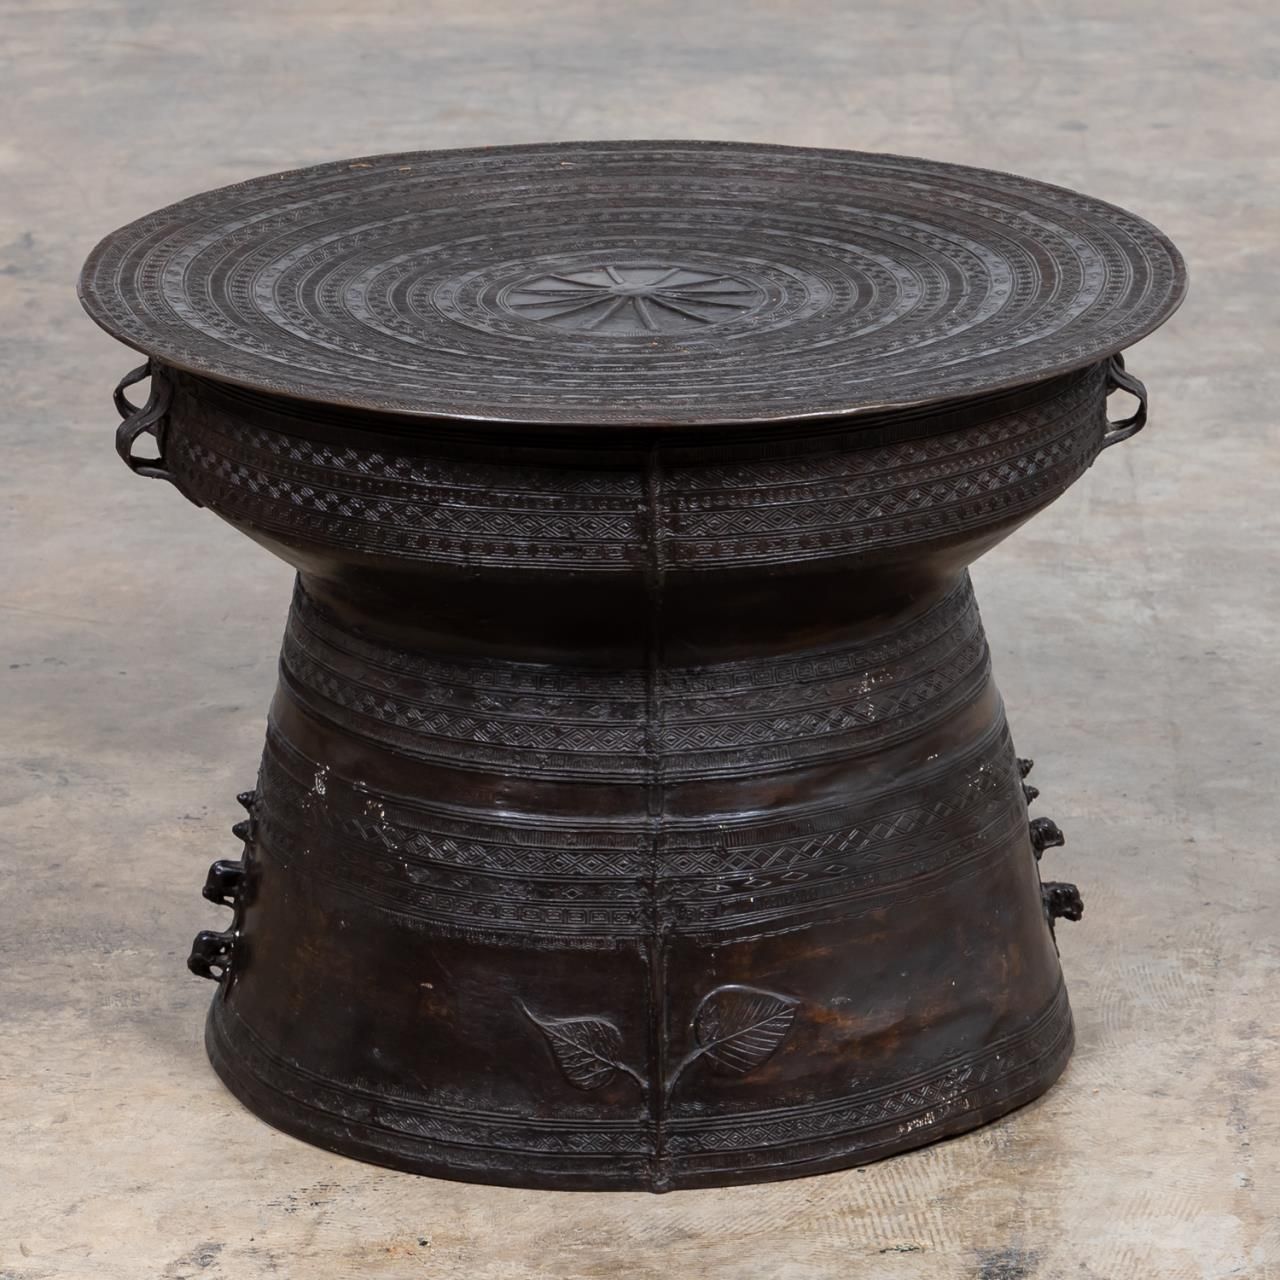 SOUTHEAST ASIAN BRONZE DRUM TABLE 35dae7